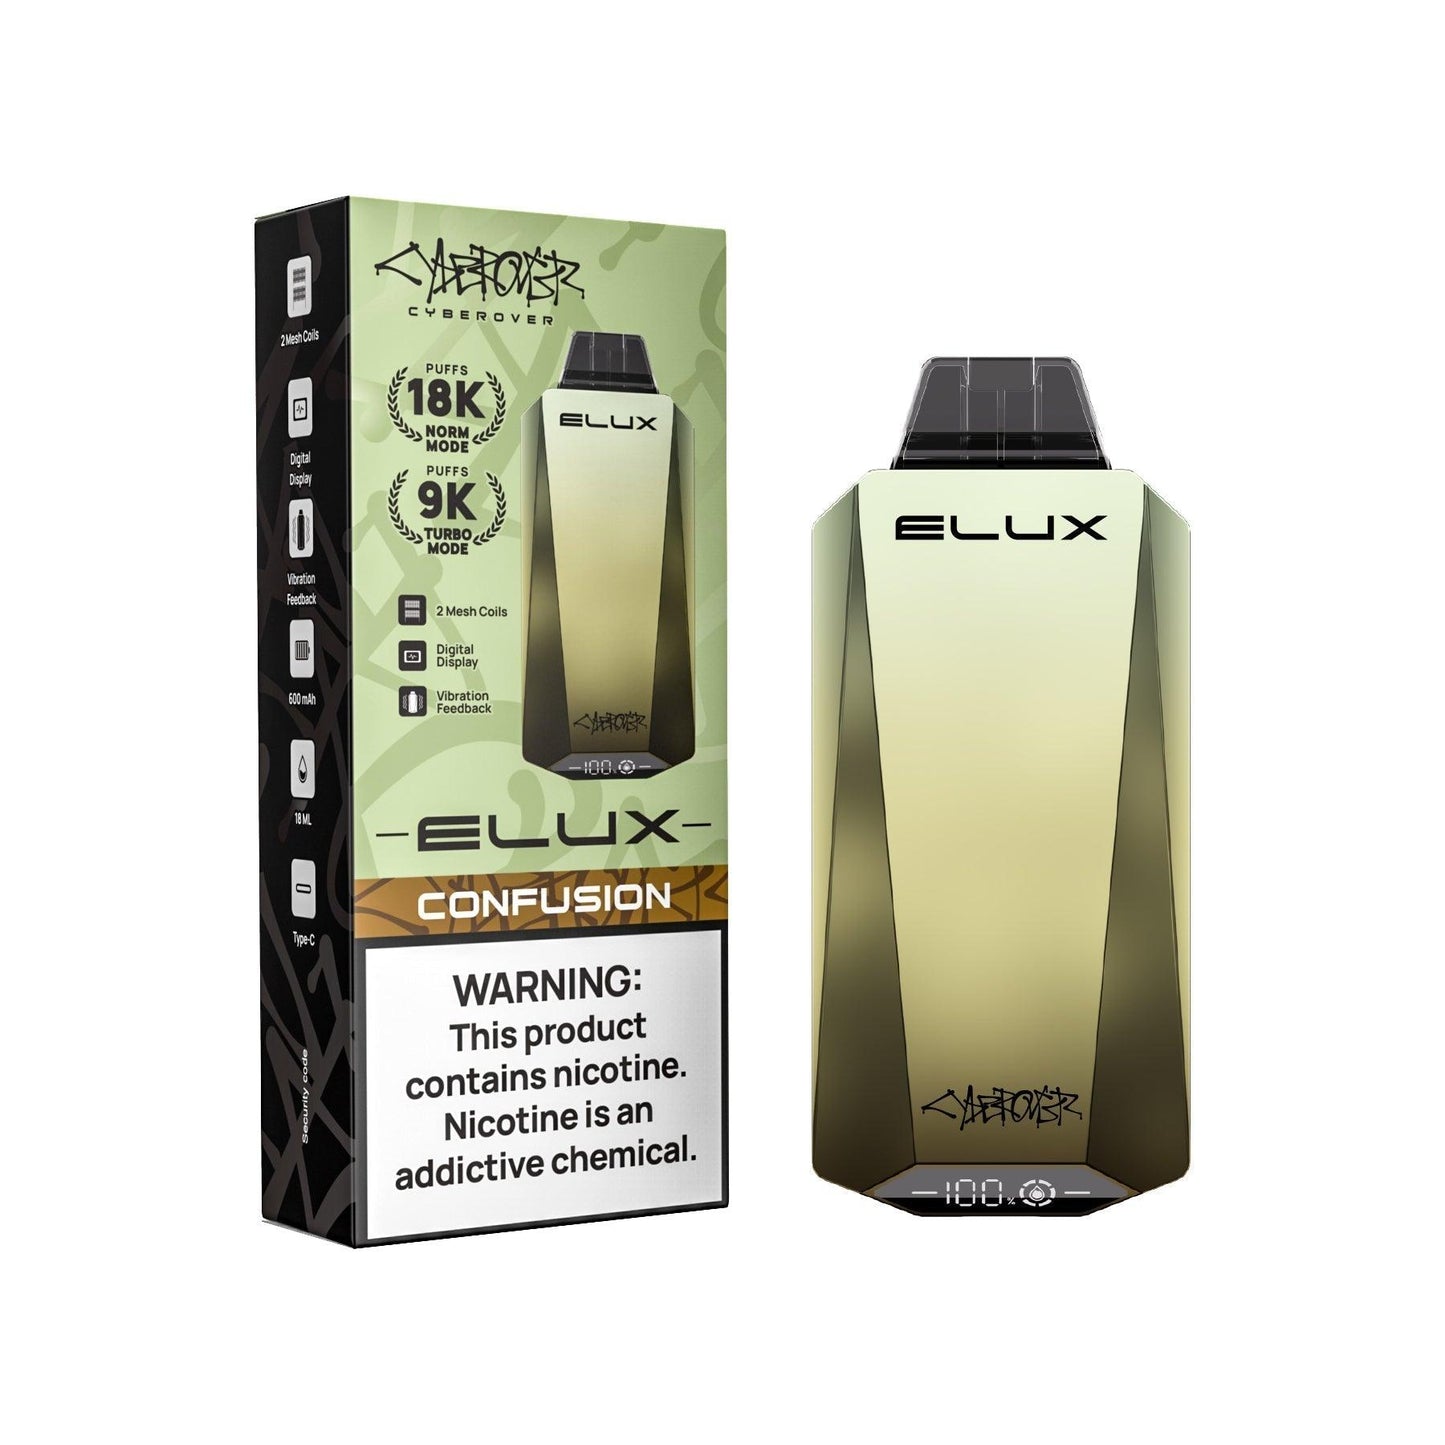 ELUX CYBEROVER 18000 DISPOSABLE VAPE 10-PACK